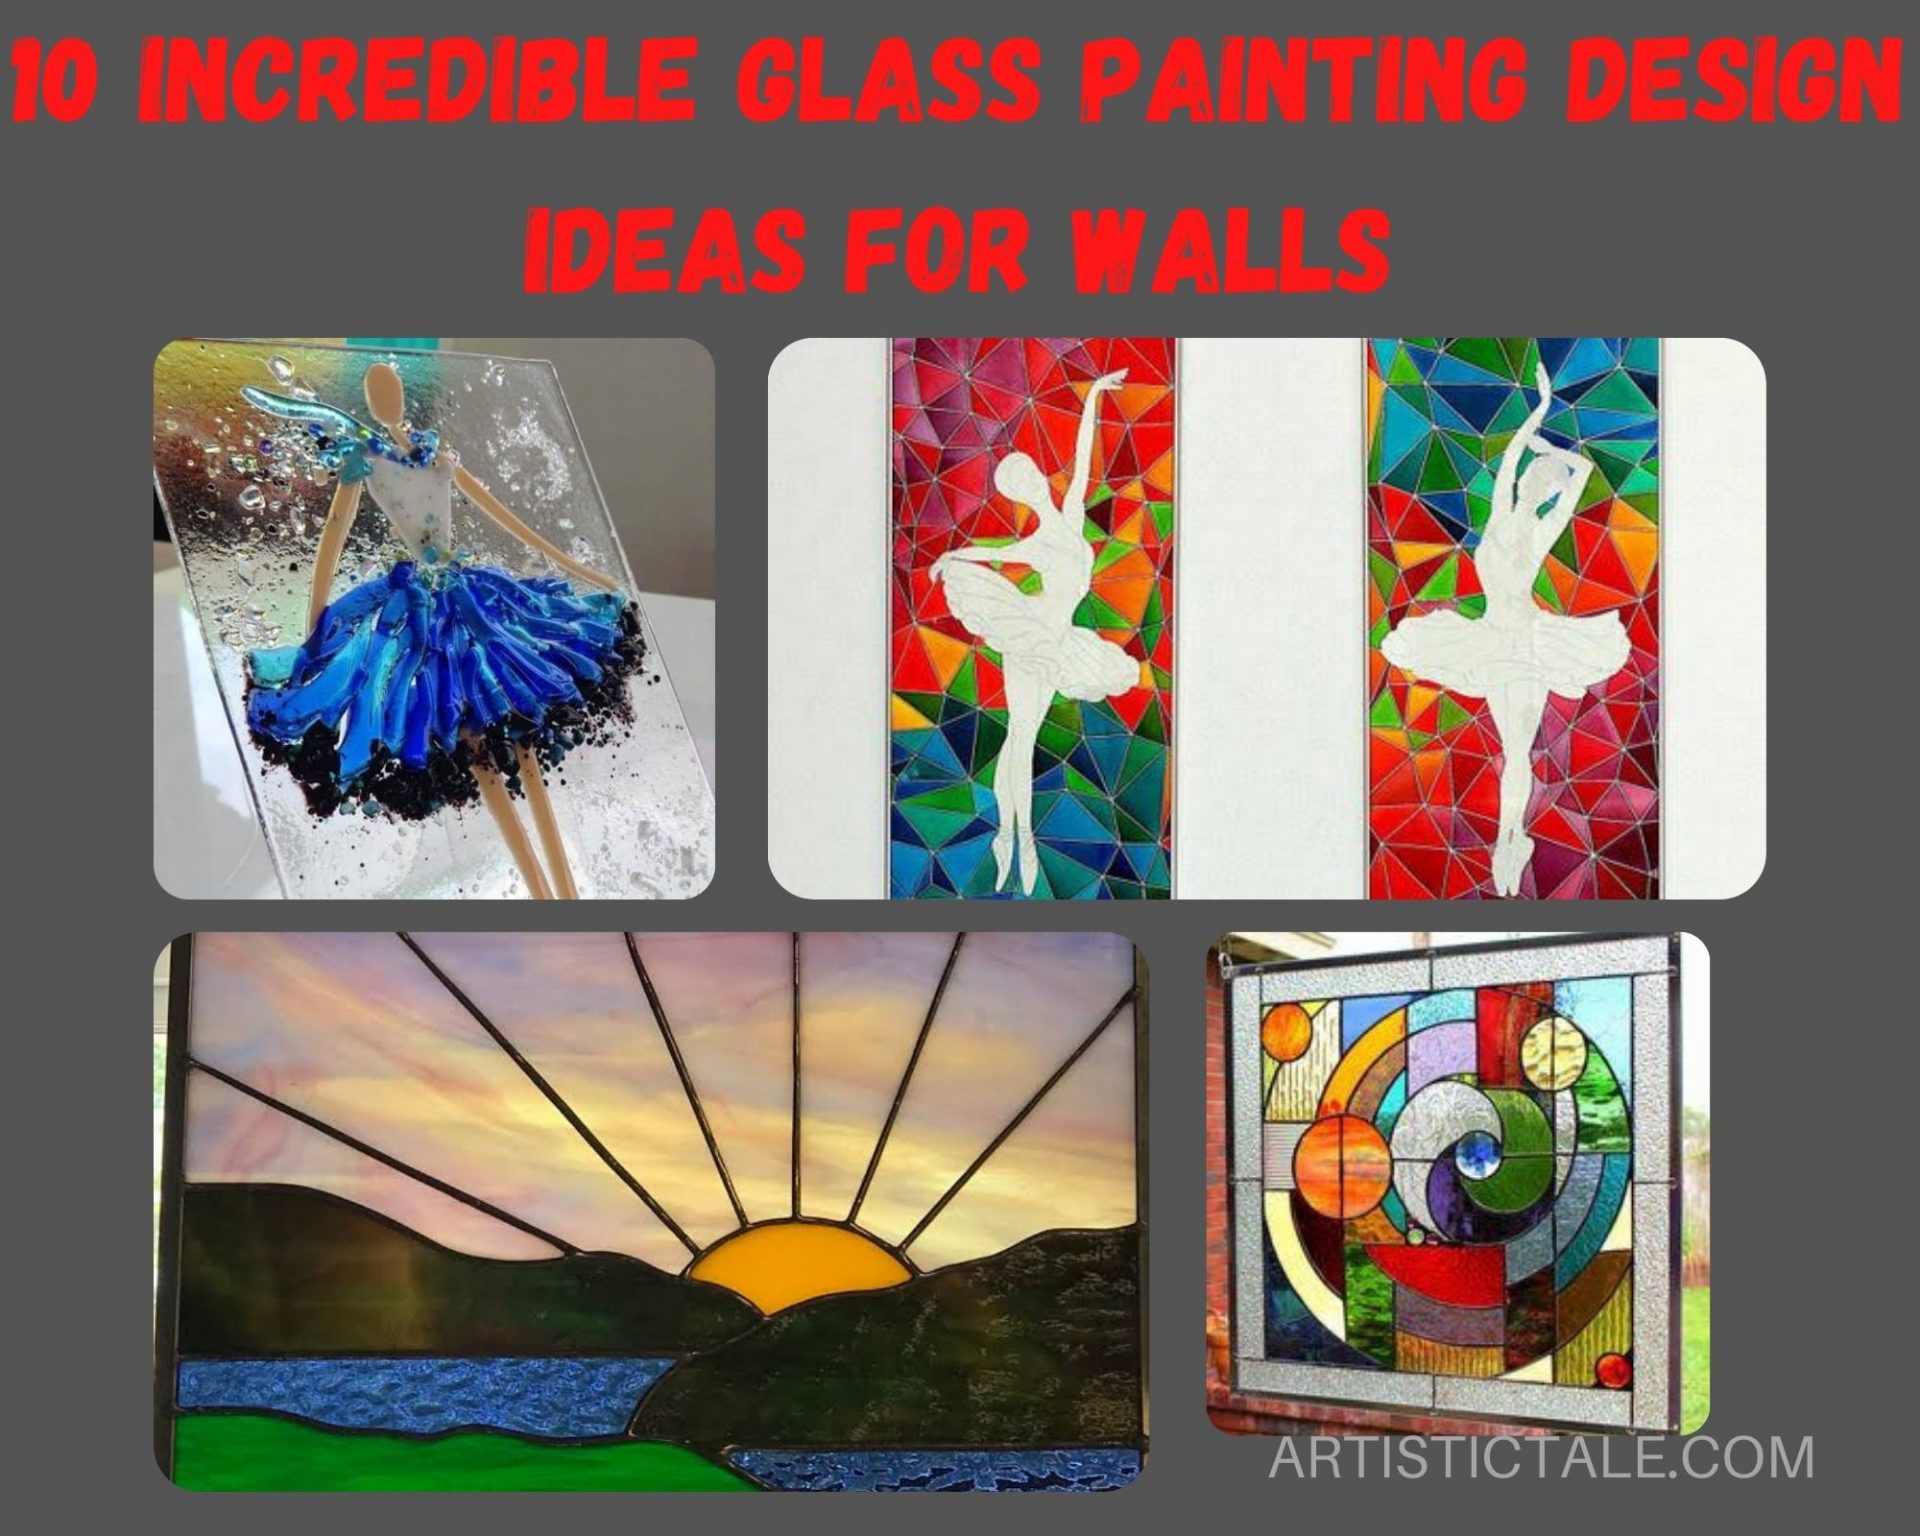 Glass painting design